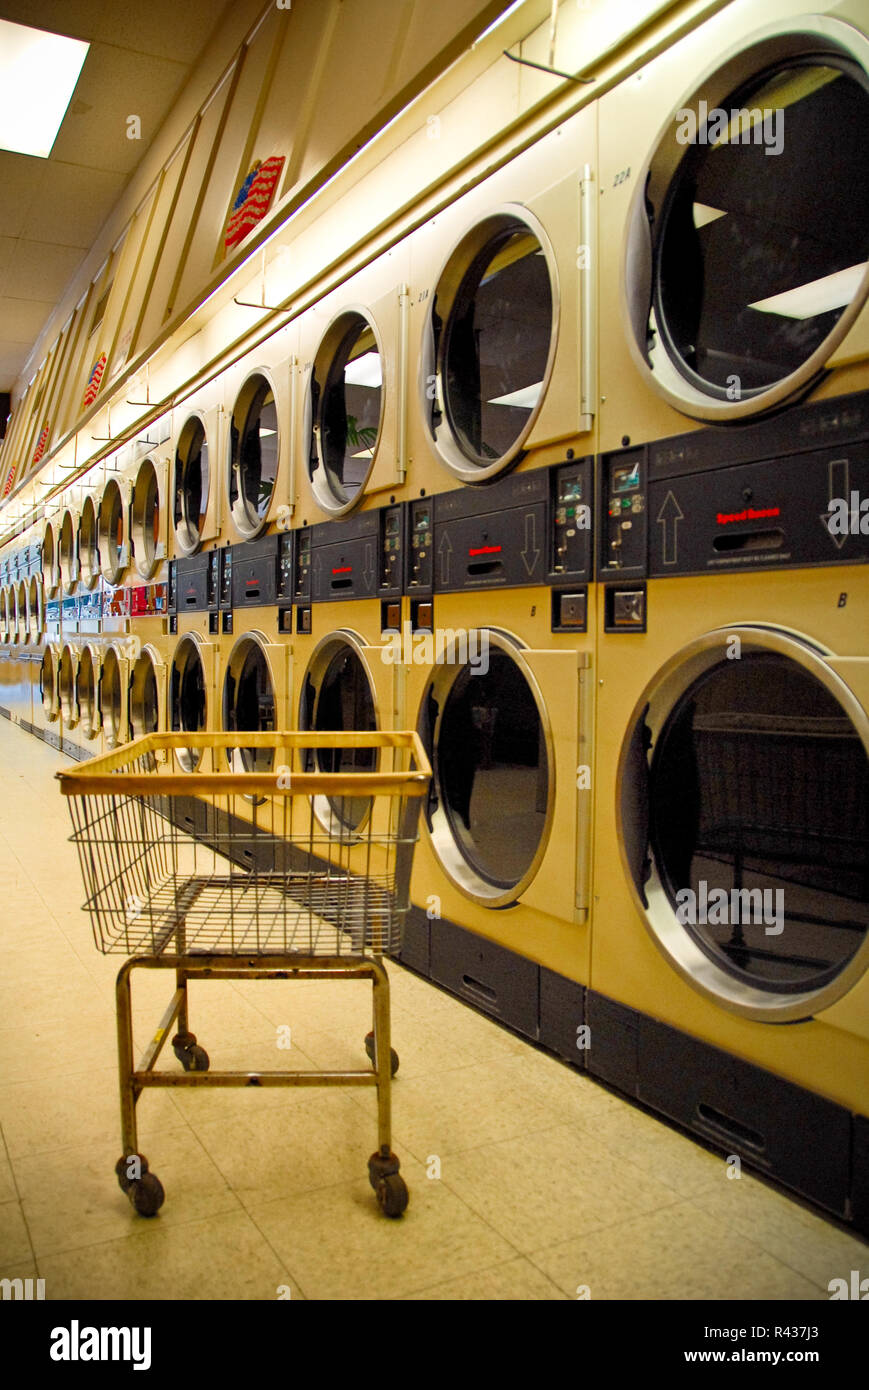 A clothing cart sits in front of a long line of washing machines at a local laundromat. Stock Photo